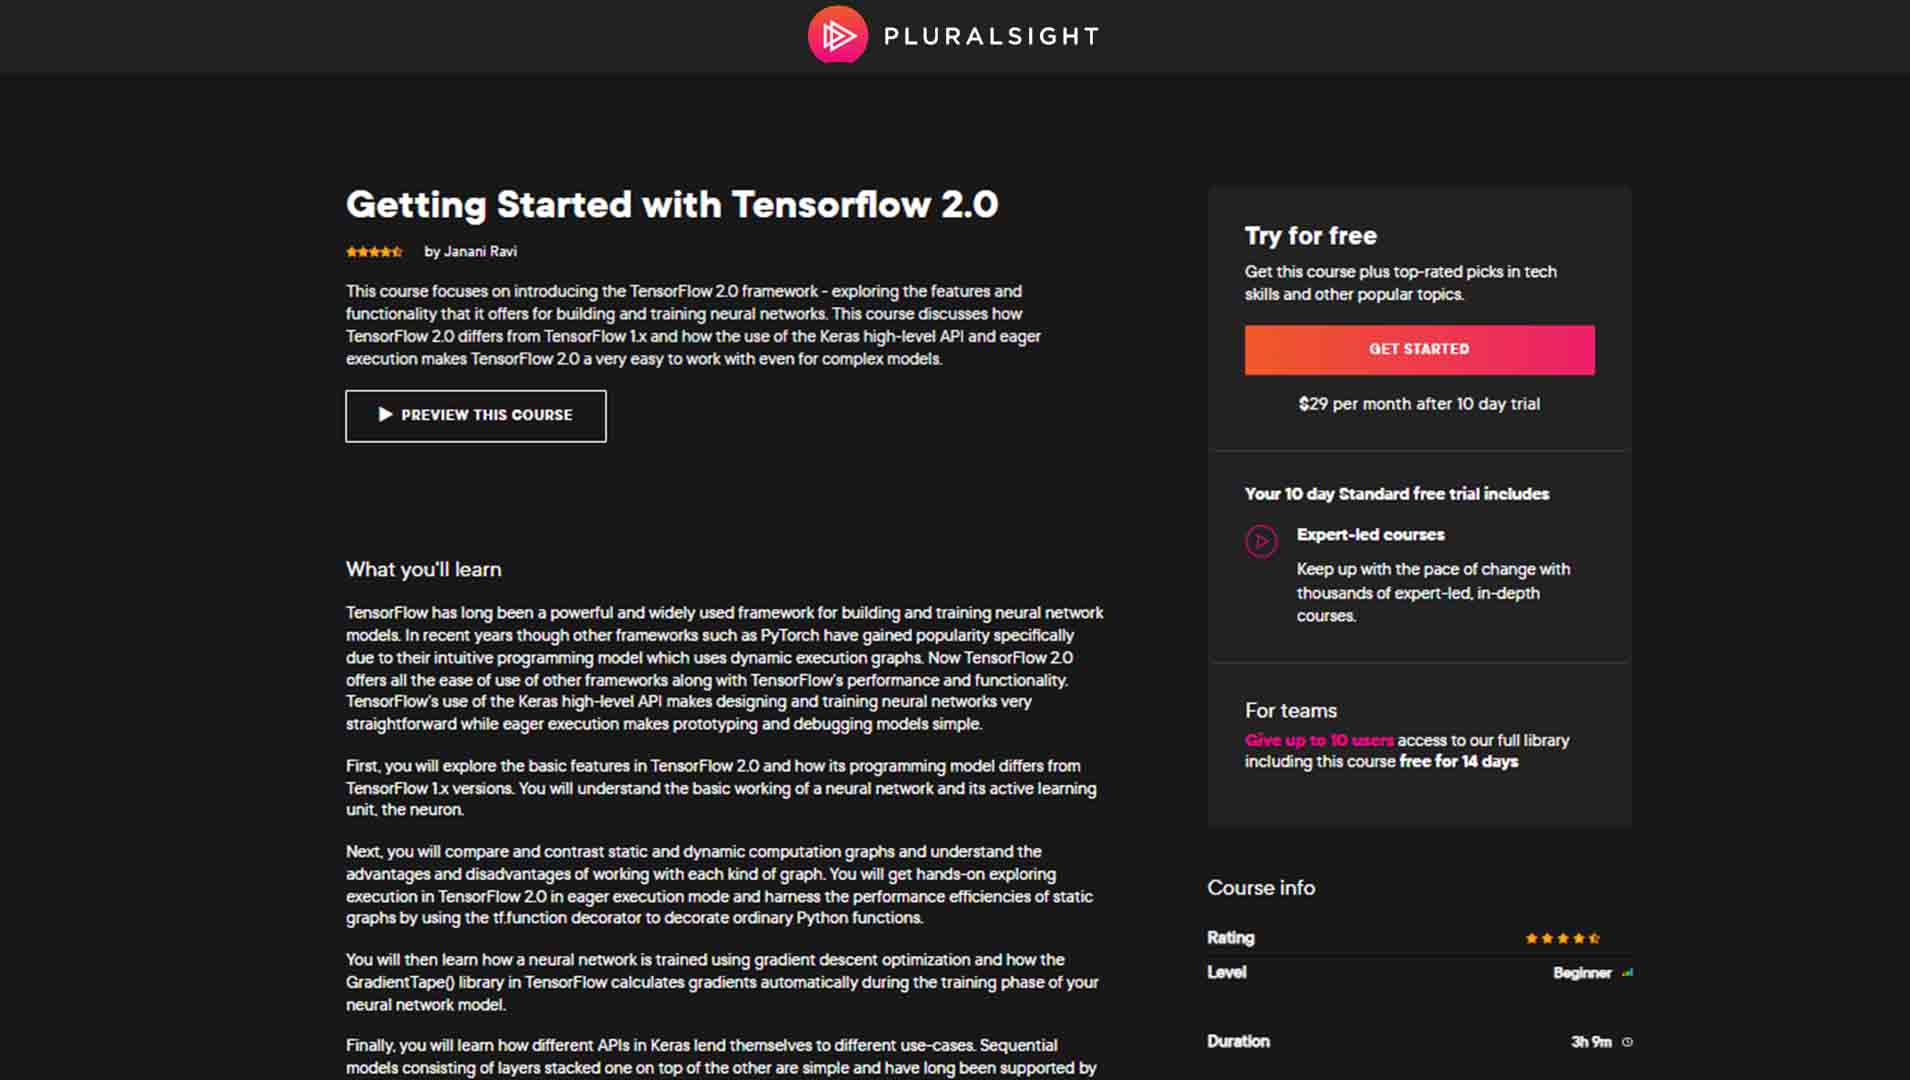 Getting Started with Tensorflow 2.0